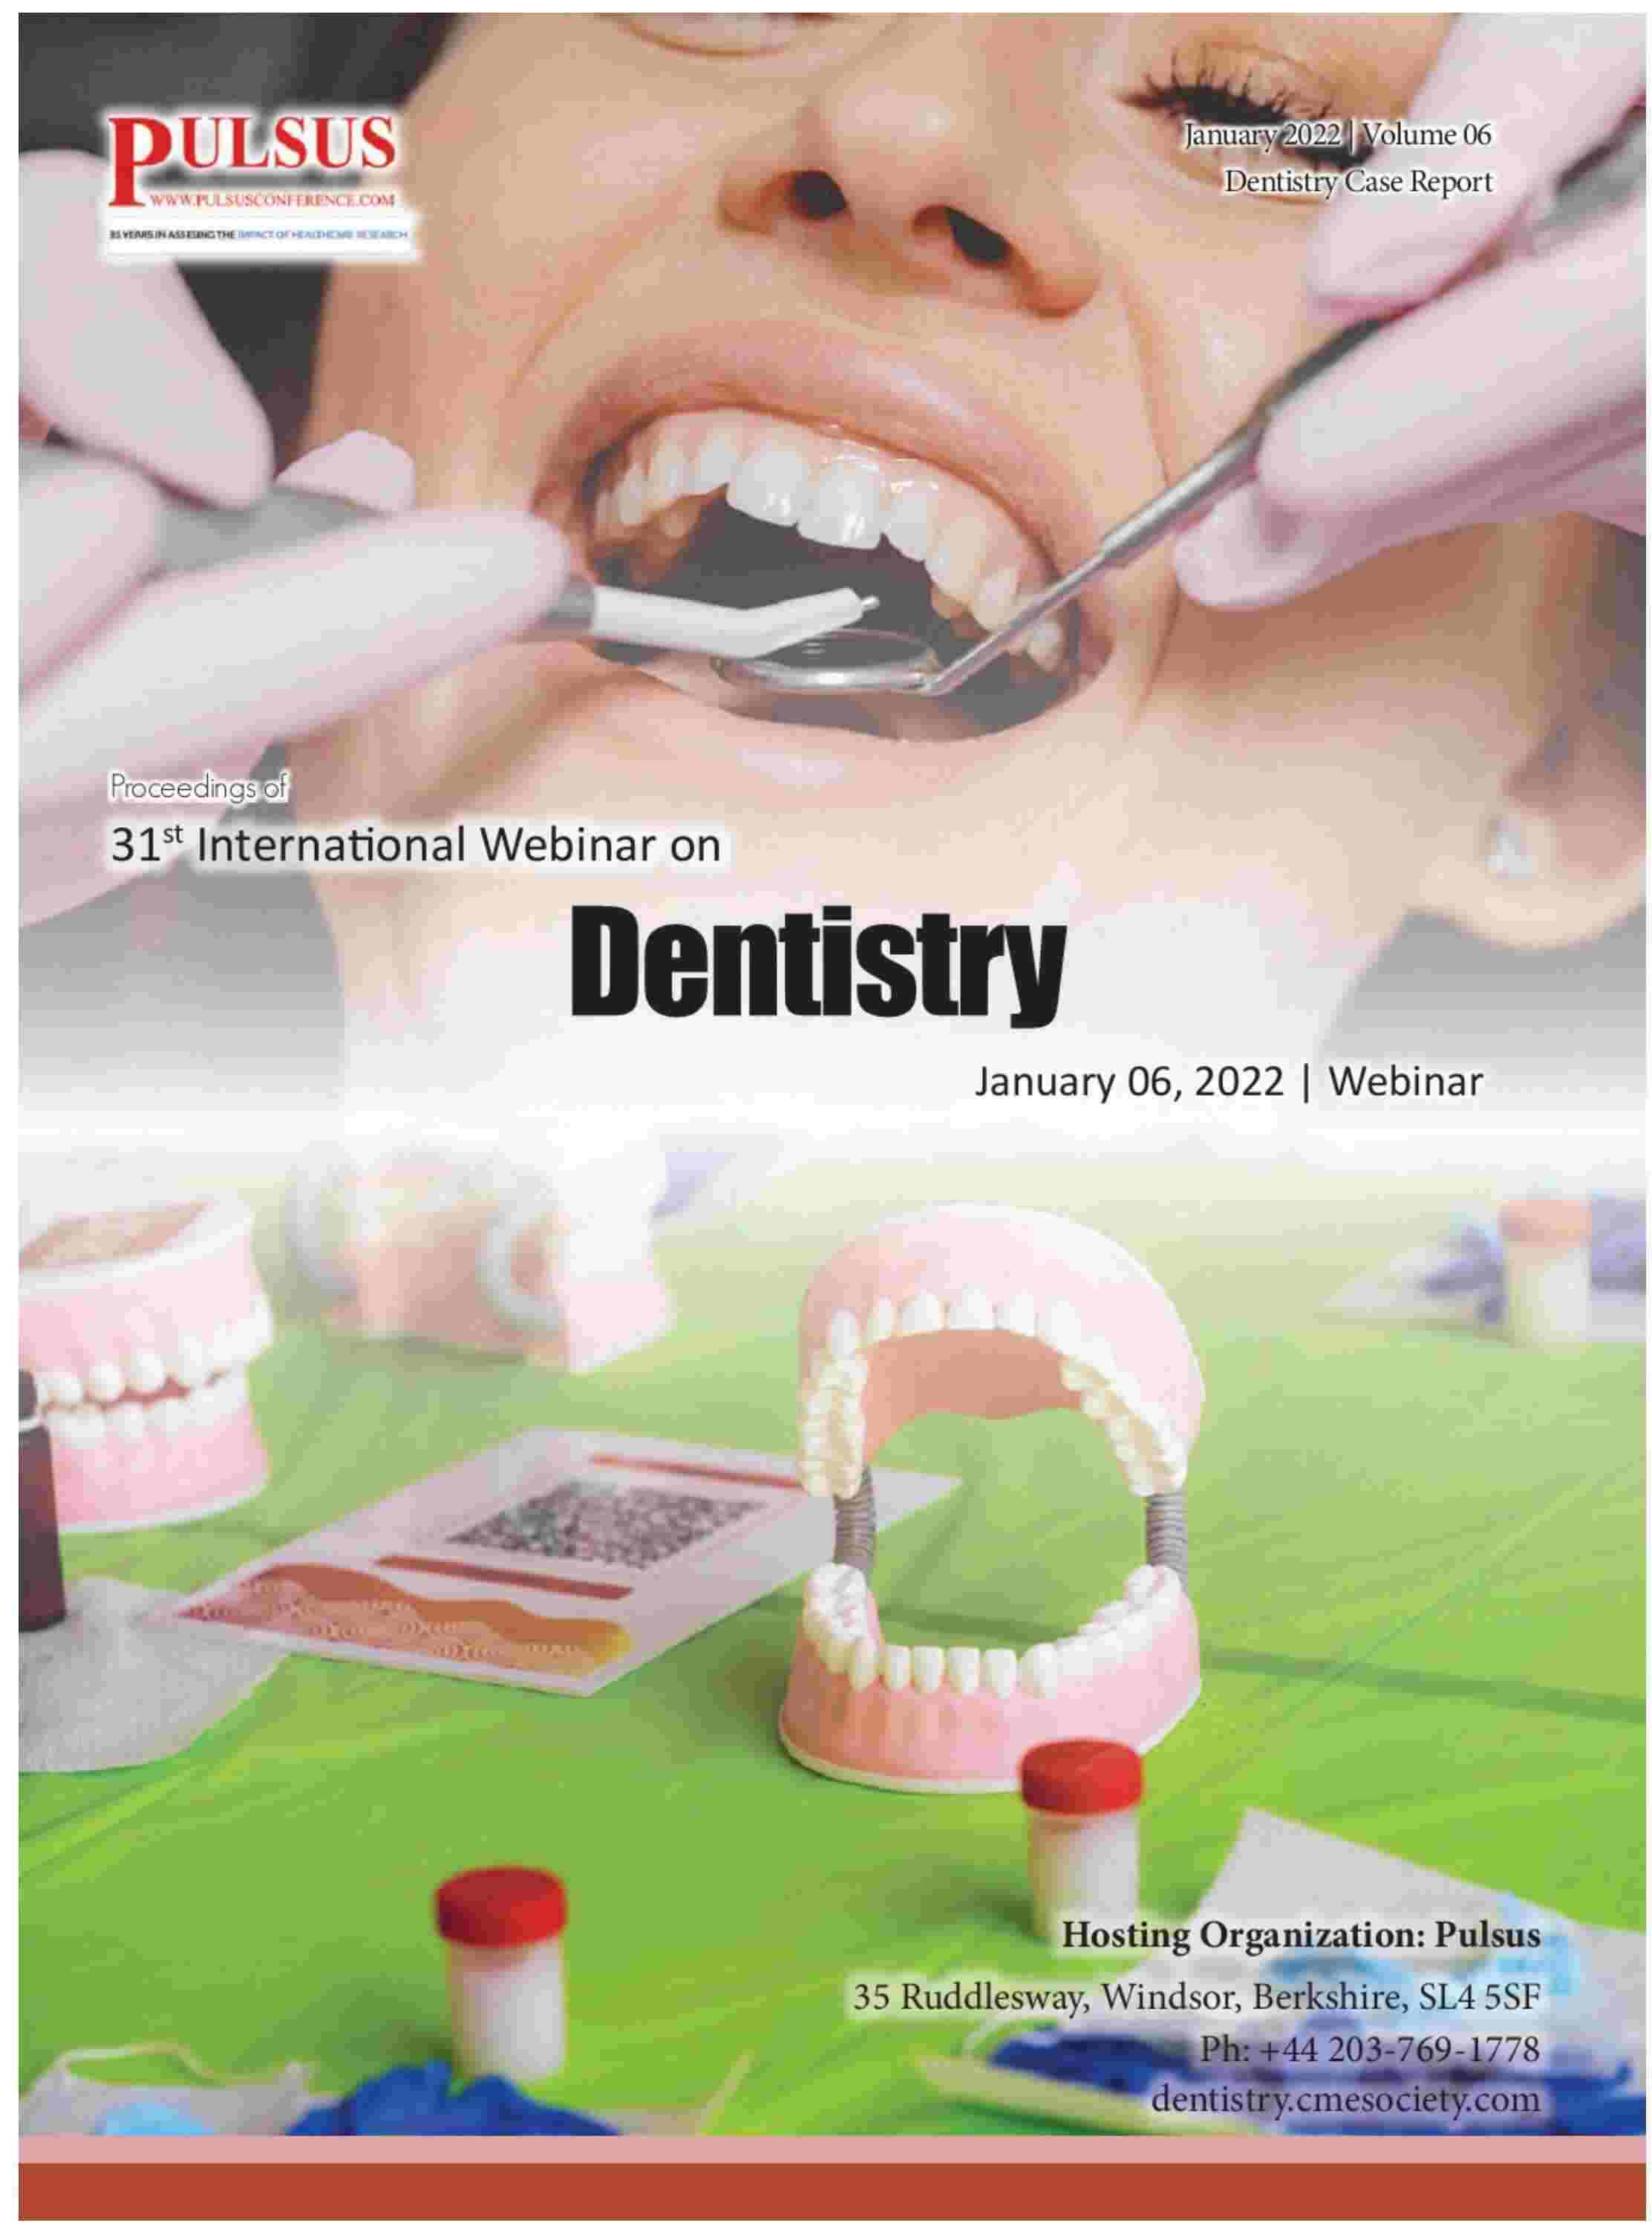 https://www.pulsus.com/conference-abstracts/dentistry-2022-proceedings.html